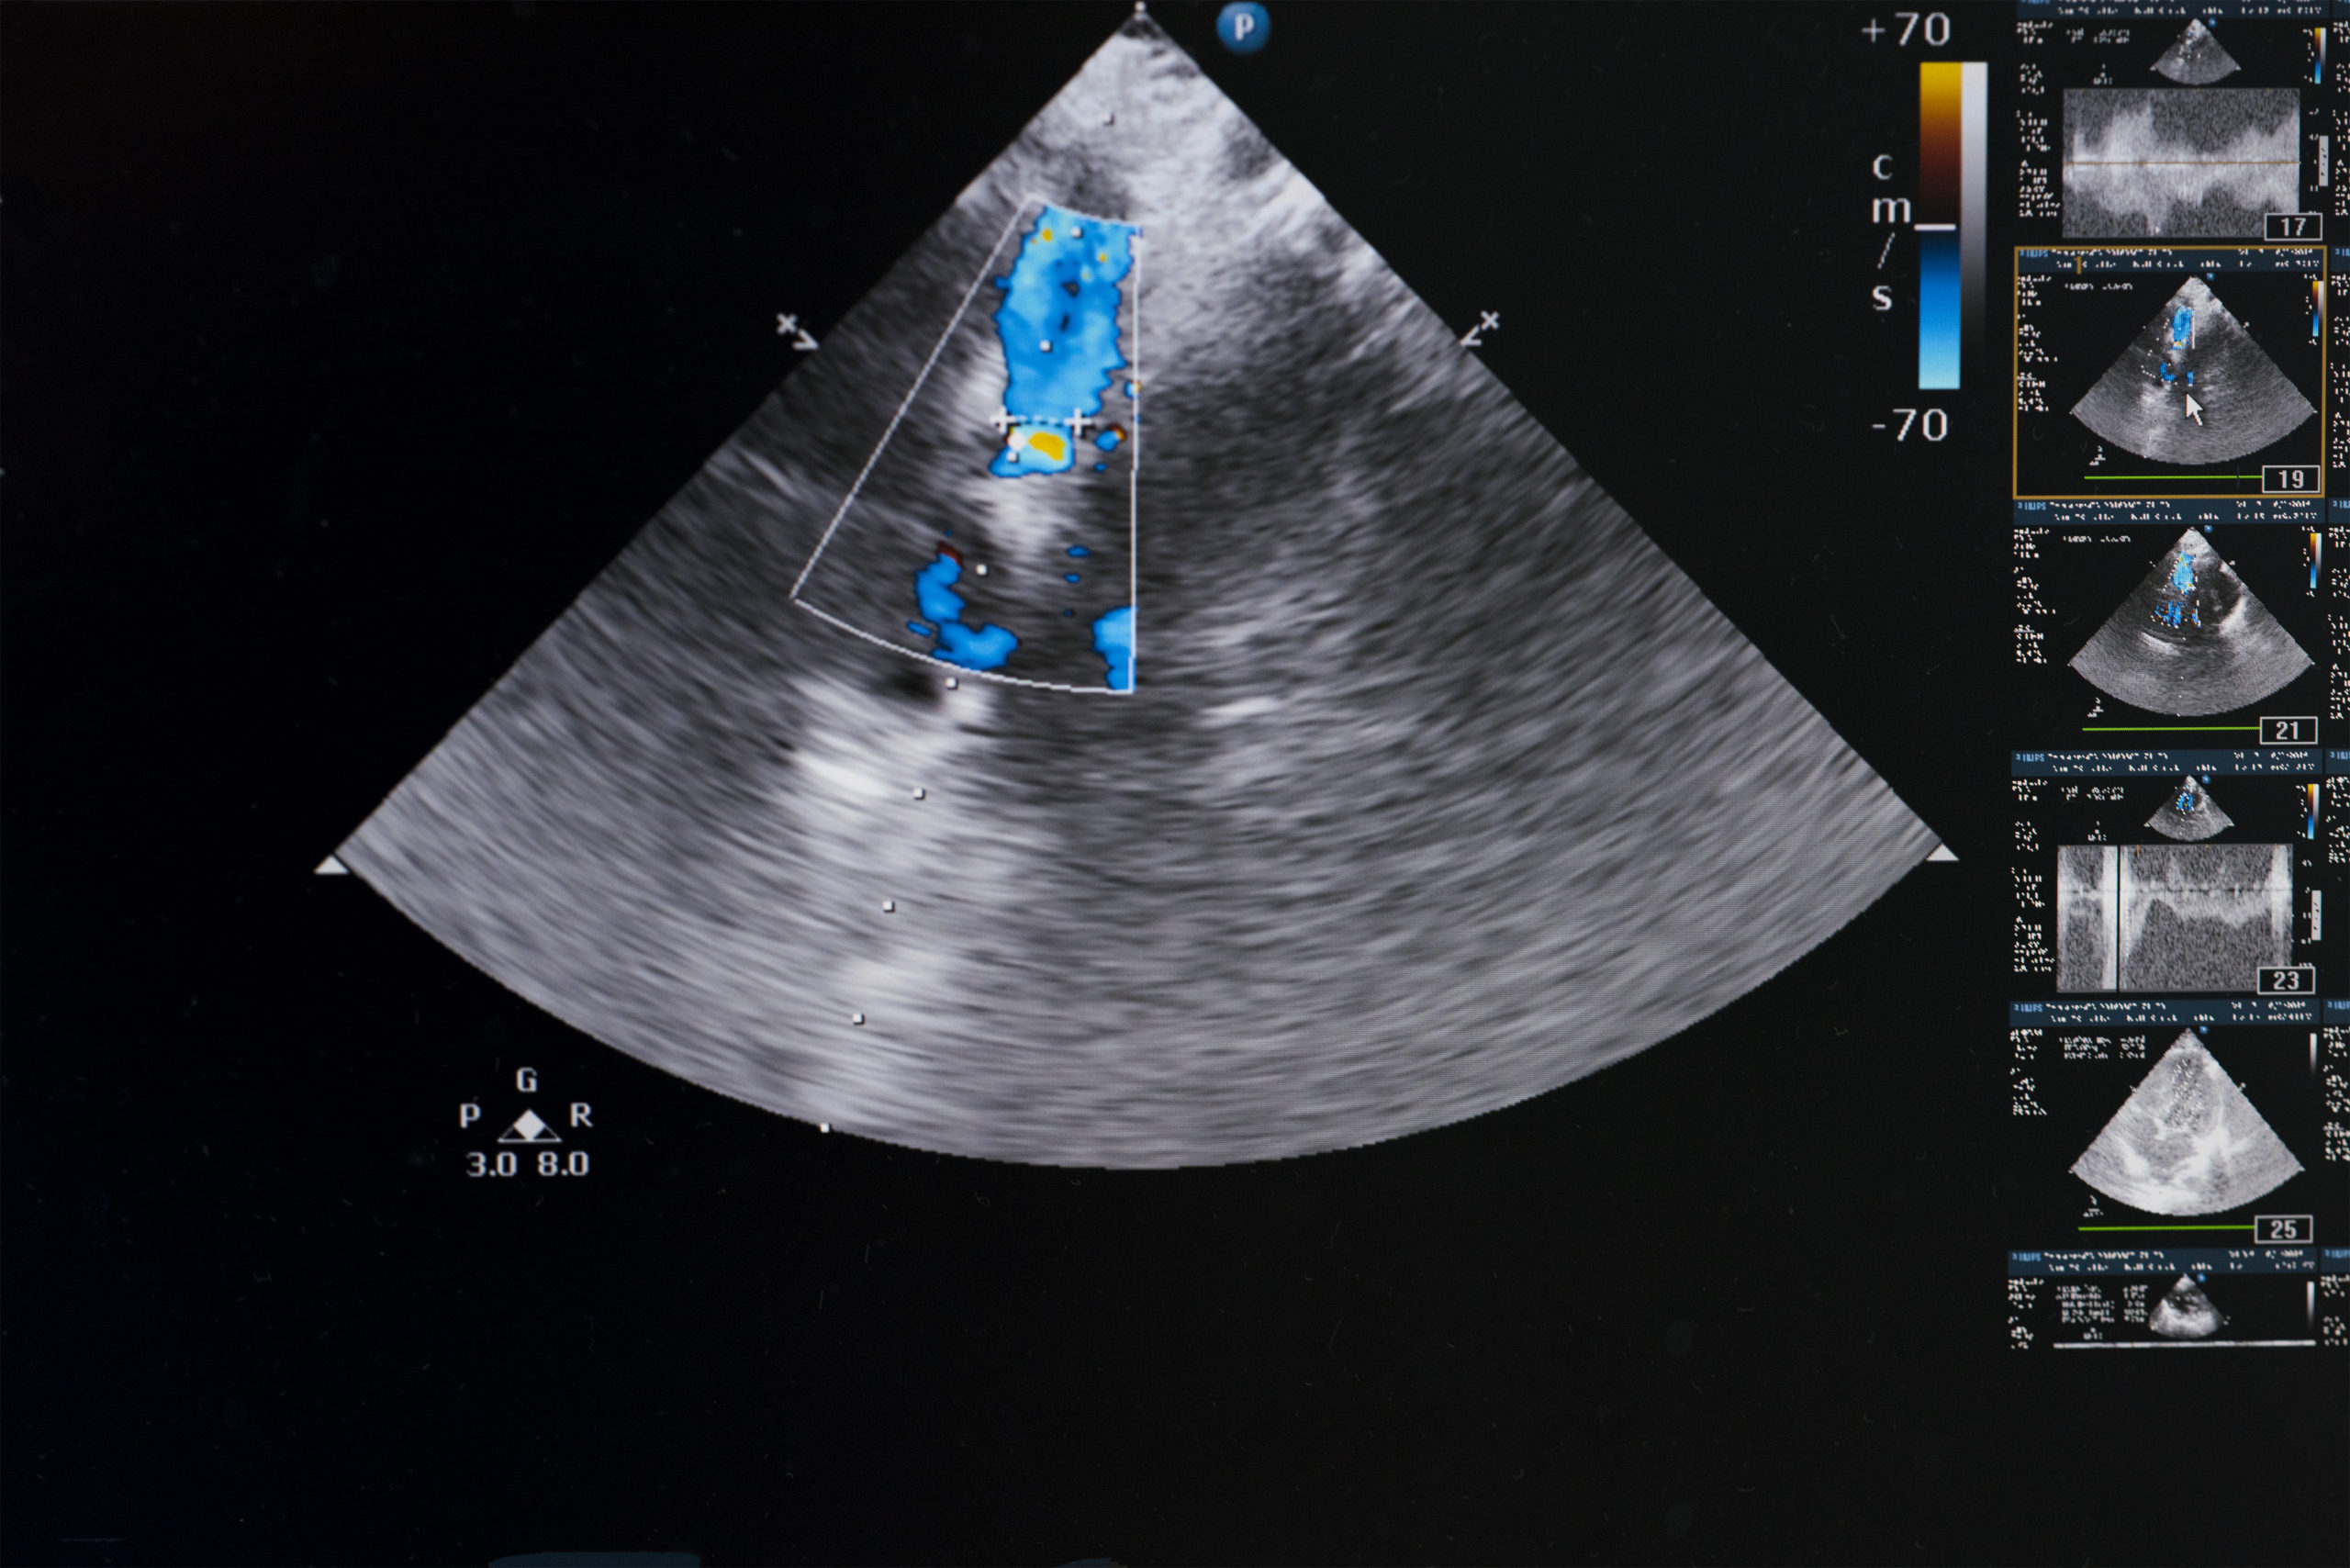 A picture of an ultrasound image showing the location of the heart.